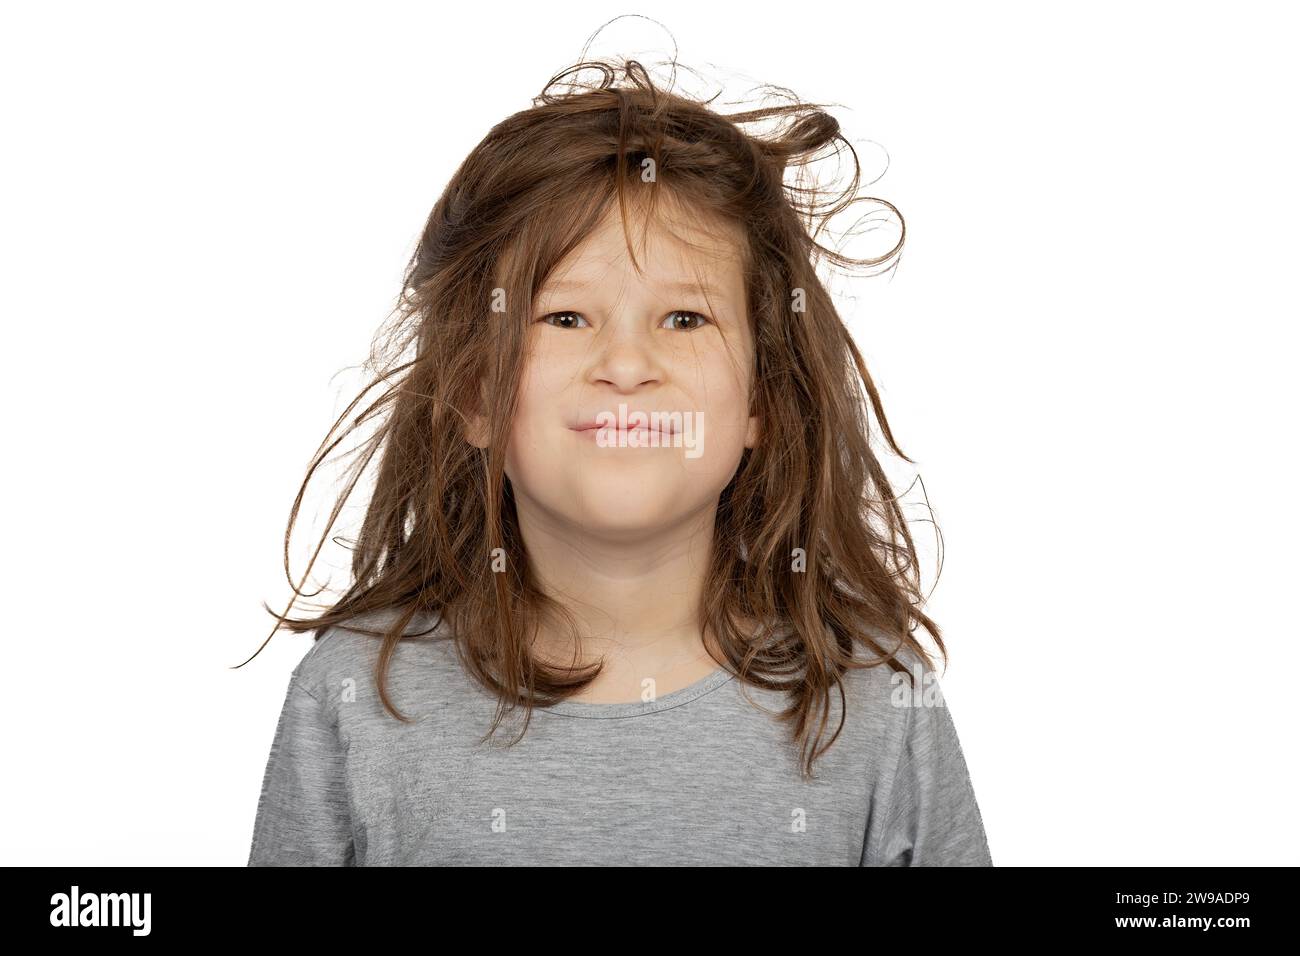 Christmas Morning Chaos: Young Girl with Bedhead on White Background Stock Photo